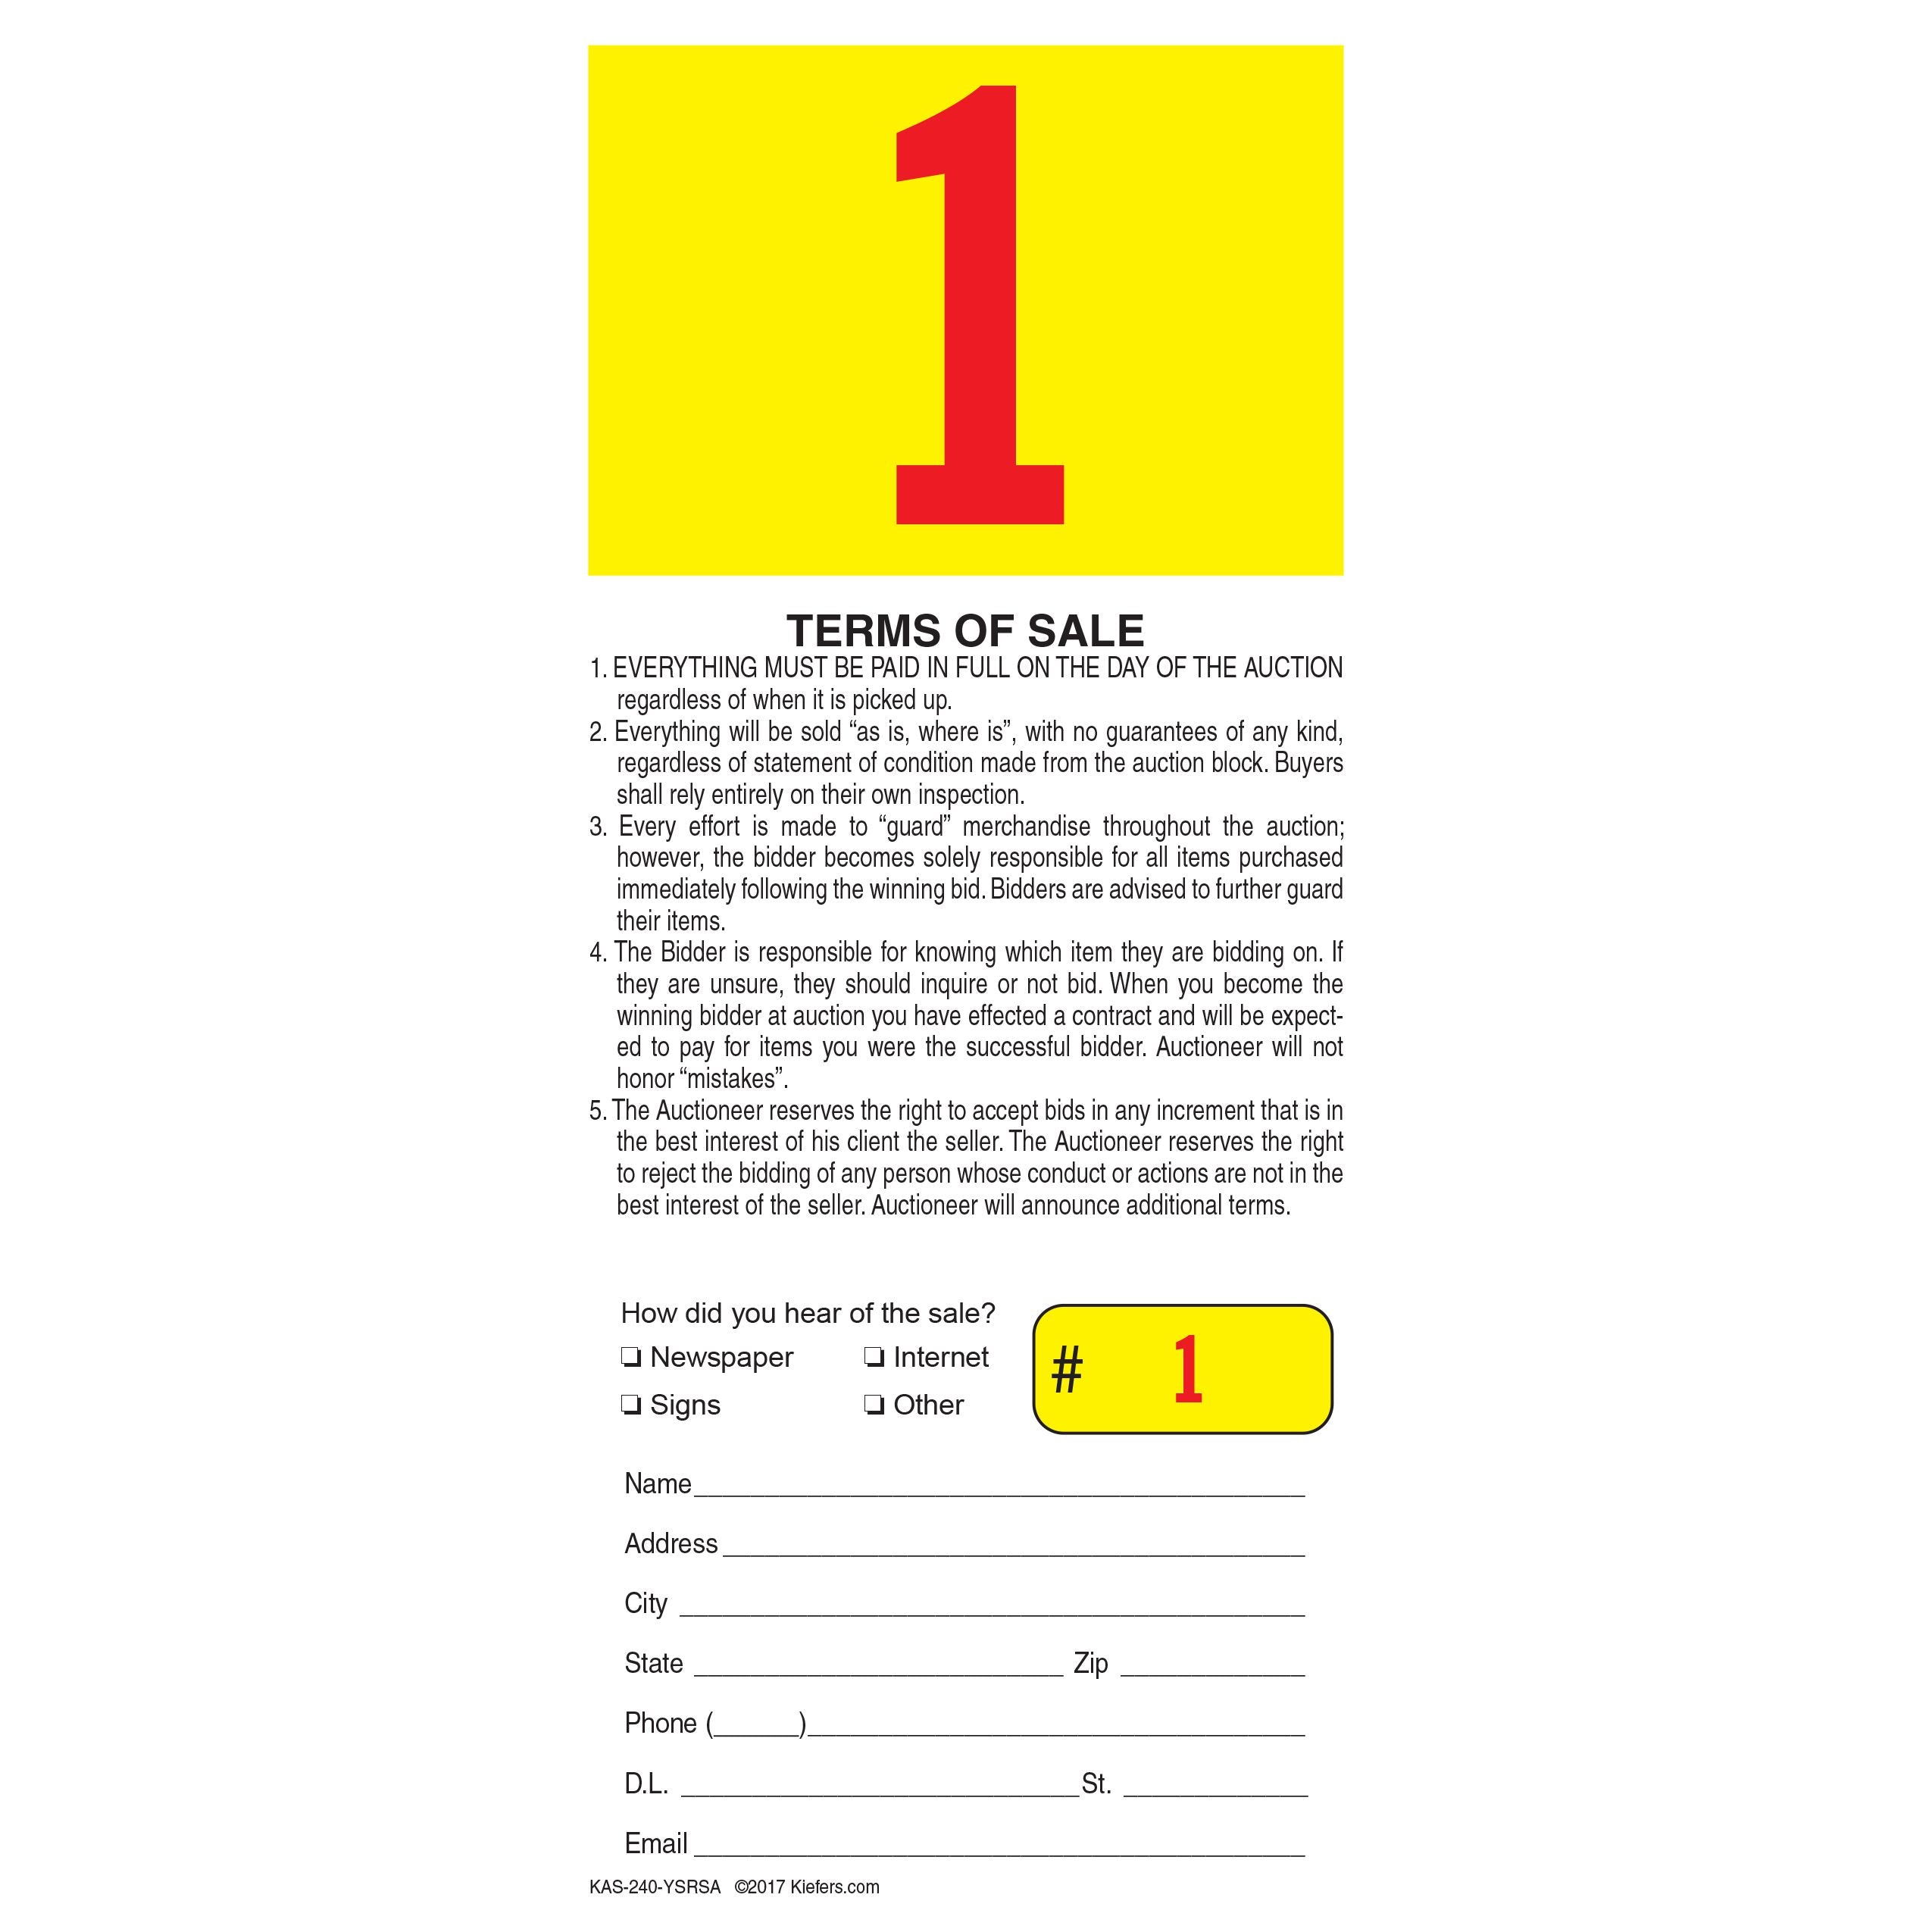 Pre-Numbered Stock Bid Cards w/ Registration Stub (500/pack) Red# w/ Yellow Square/Black Ink